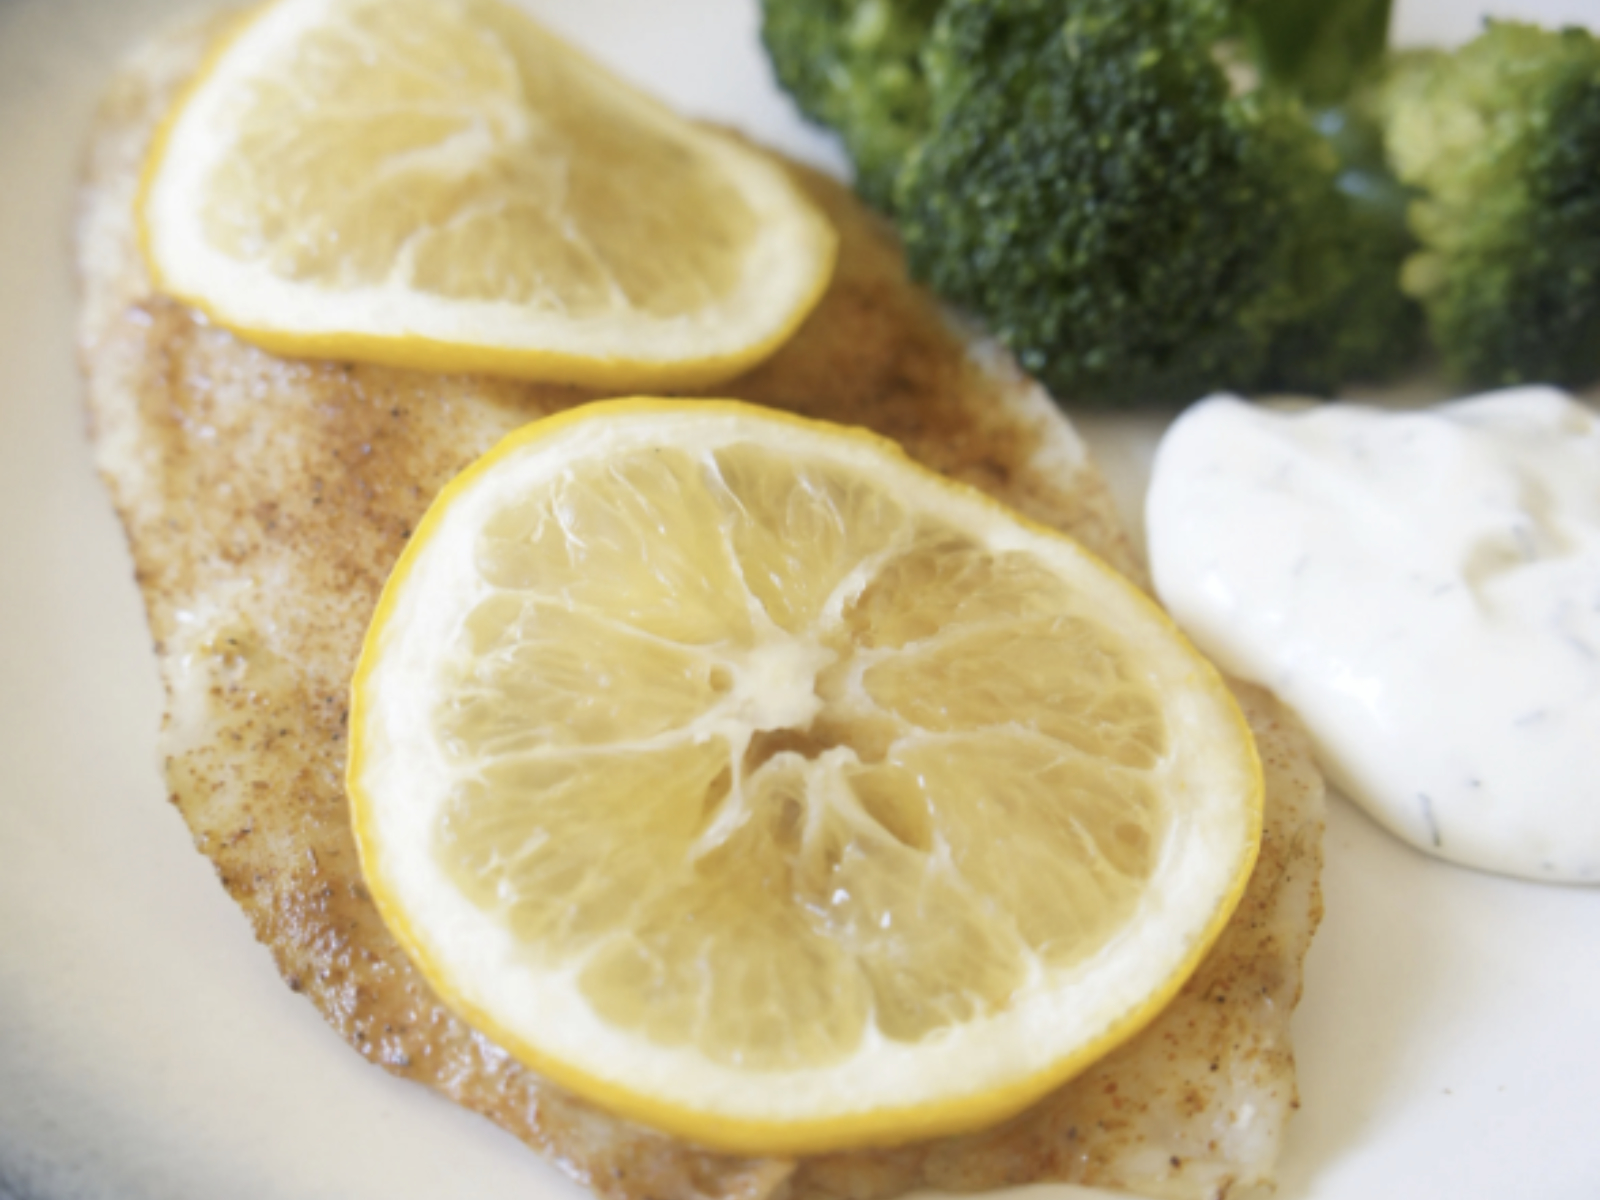 tilapia fillet with lemon slices and side of broccoli